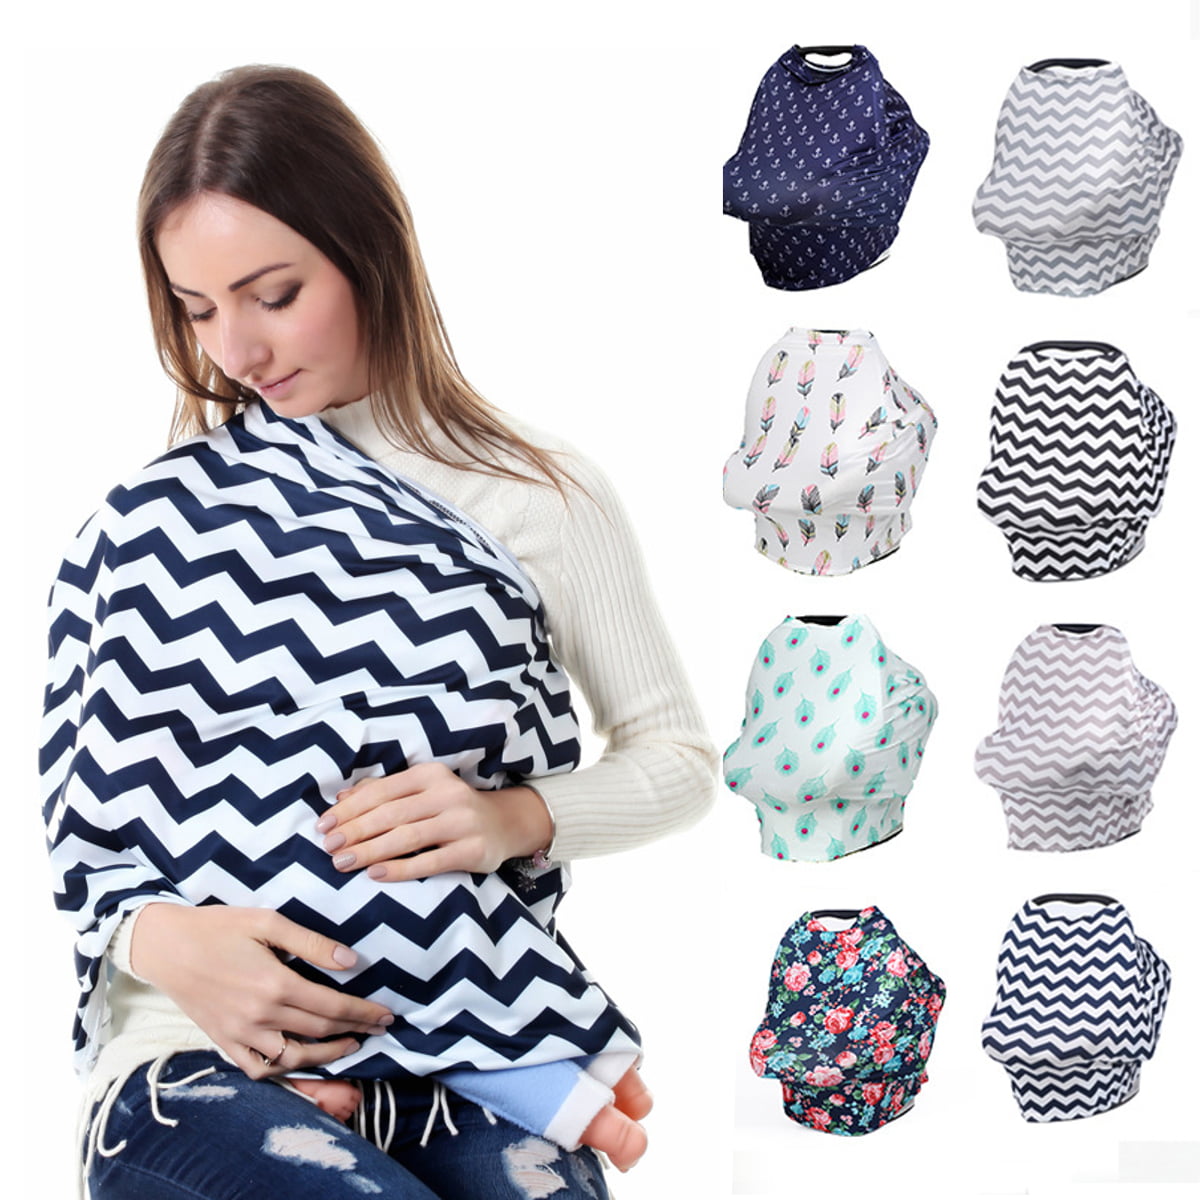 Stretchy Breathable Nursing Scarf Infant Stroller Cover Carseat Canopy Breastfeeding Stroller Cover Rehomy Baby Car Seat Cover